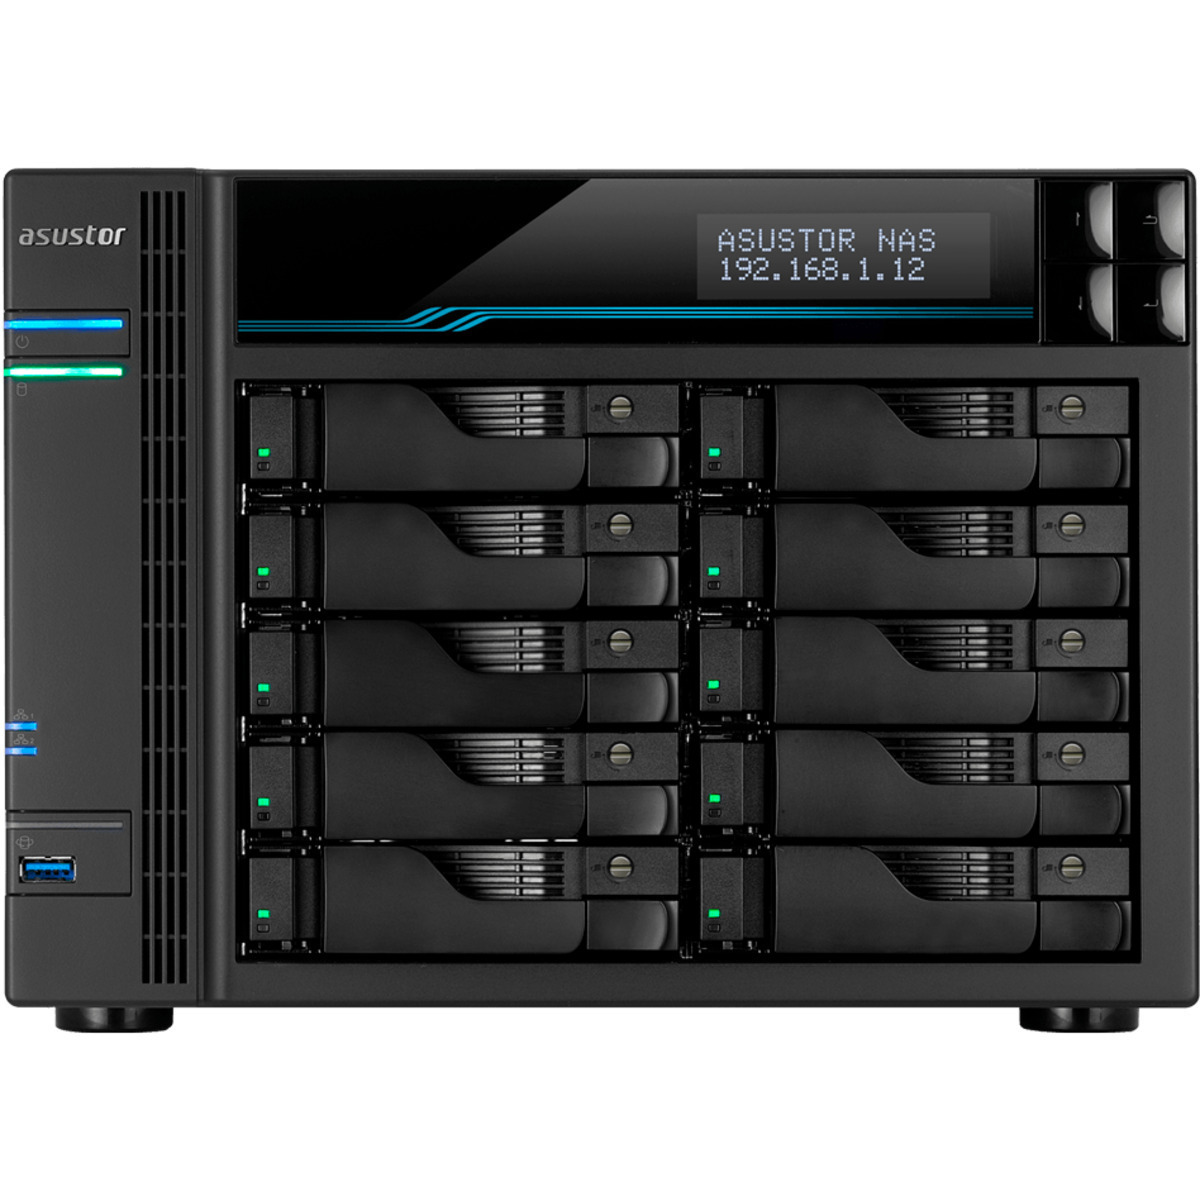 buy ASUSTOR AS7110T Lockerstor 10 Pro 40tb Desktop NAS - Network Attached Storage Device 10x4000gb Samsung 870 EVO MZ-77E4T0BAM 2.5 560/530MB/s SATA 6Gb/s SSD CONSUMER Class Drives Installed - Burn-In Tested - nas headquarters buy network attached storage server device das new raid-5 free shipping usa spring sale AS7110T Lockerstor 10 Pro